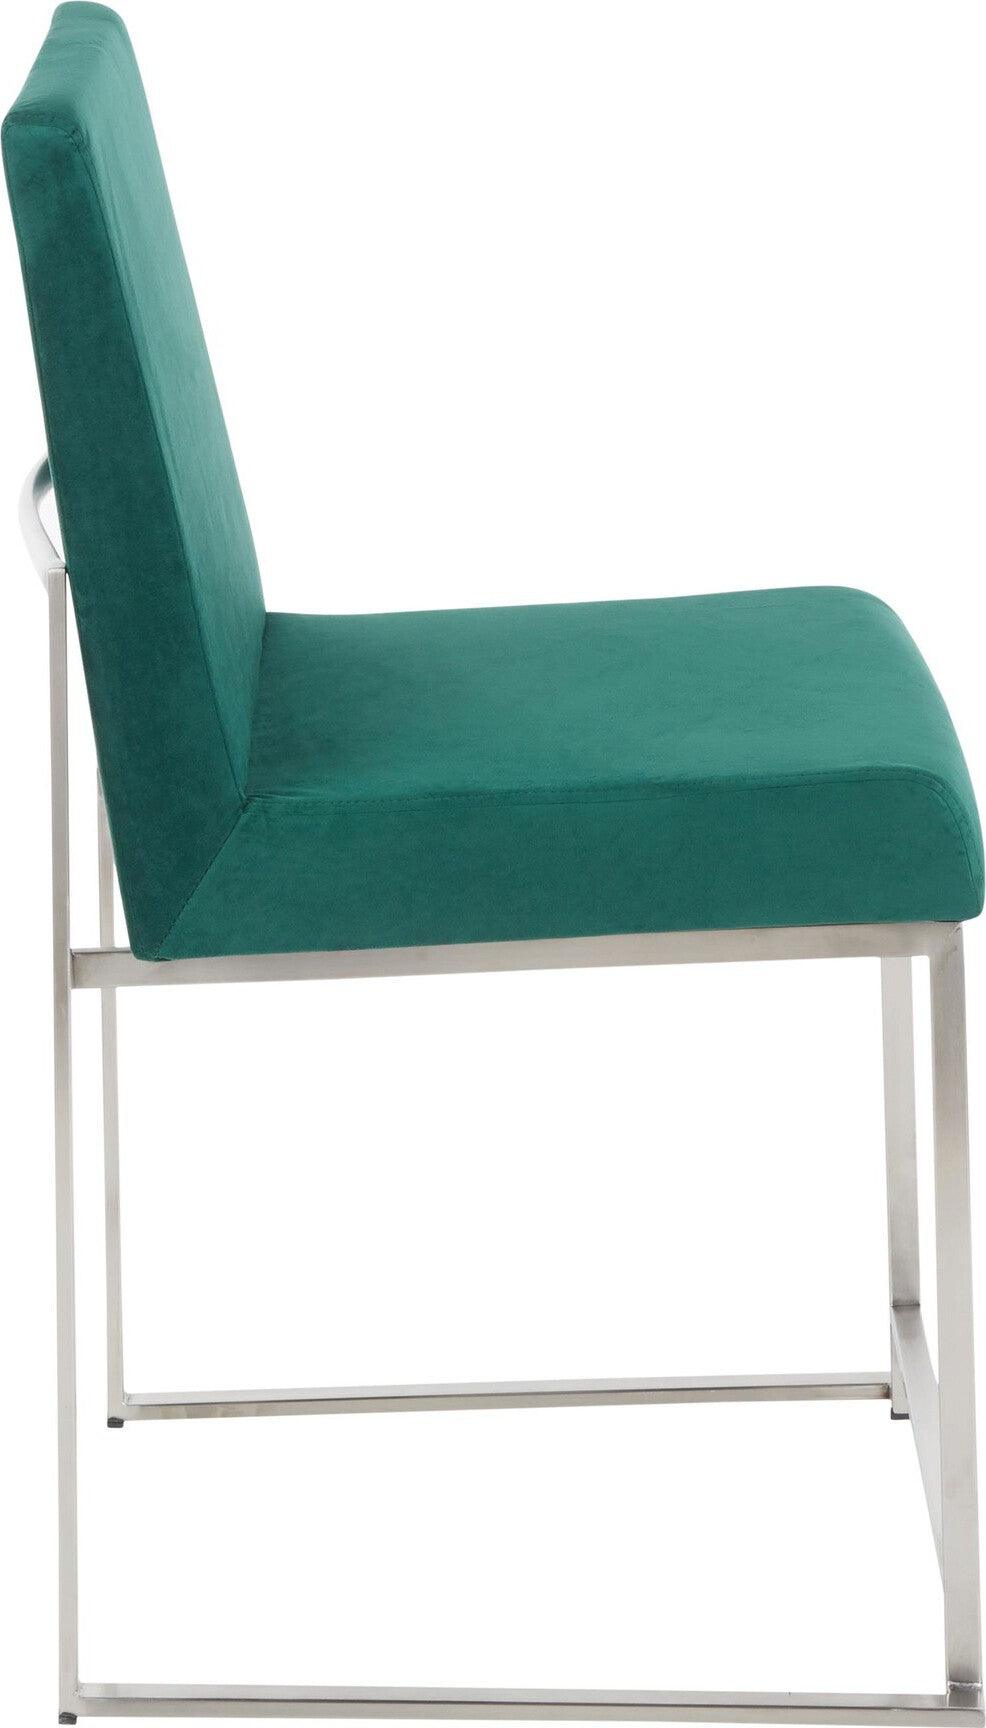 Lumisource Dining Chairs - High Back Fuji Contemporary Dining Chair in Stainless Steel and Green Velvet (Set of 2)